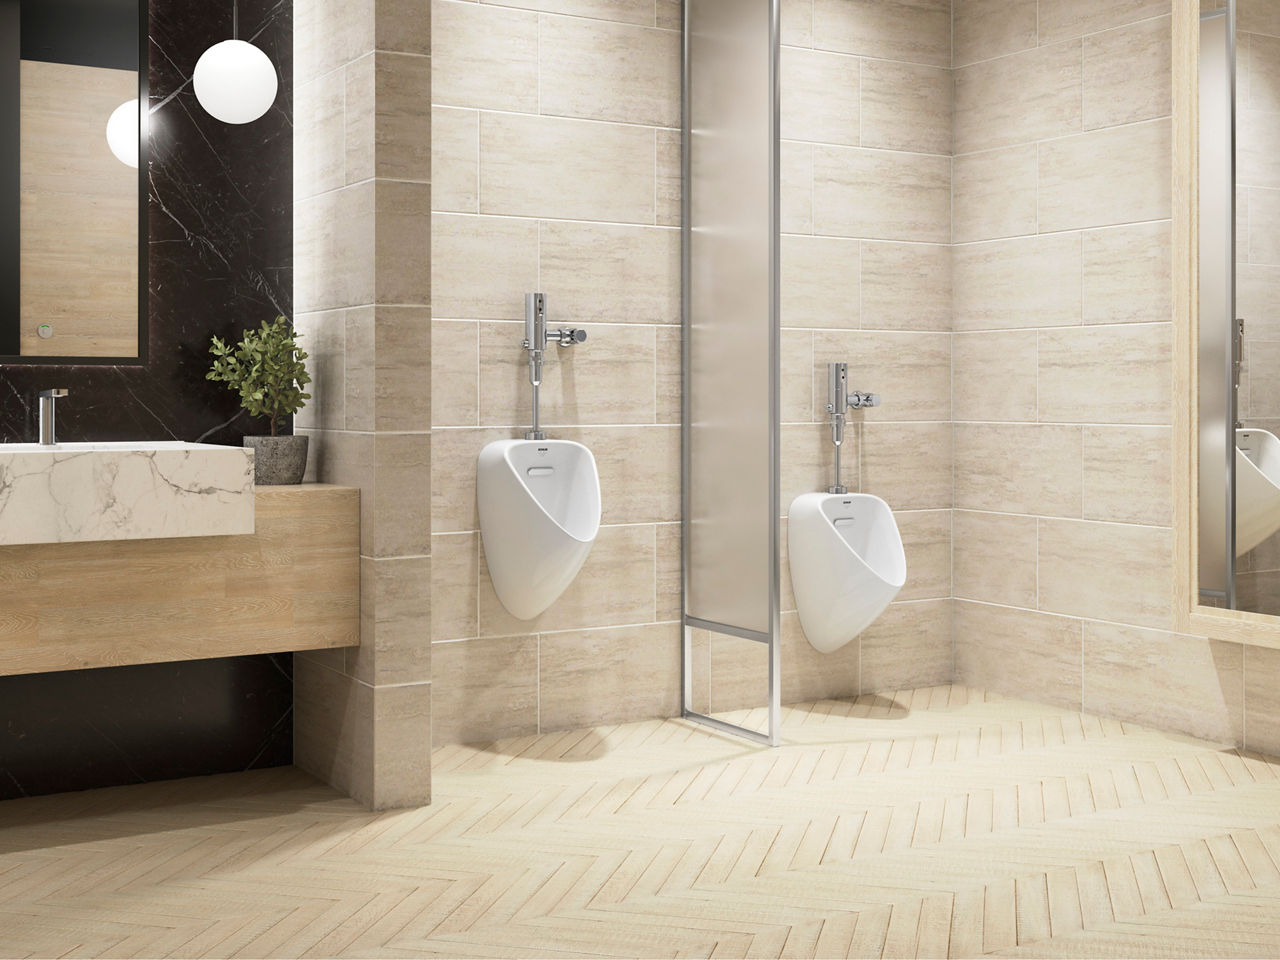 Two white KOHLER Tend urinals mounted on a tan marble tiled wall, with a frosted glass partition between them.